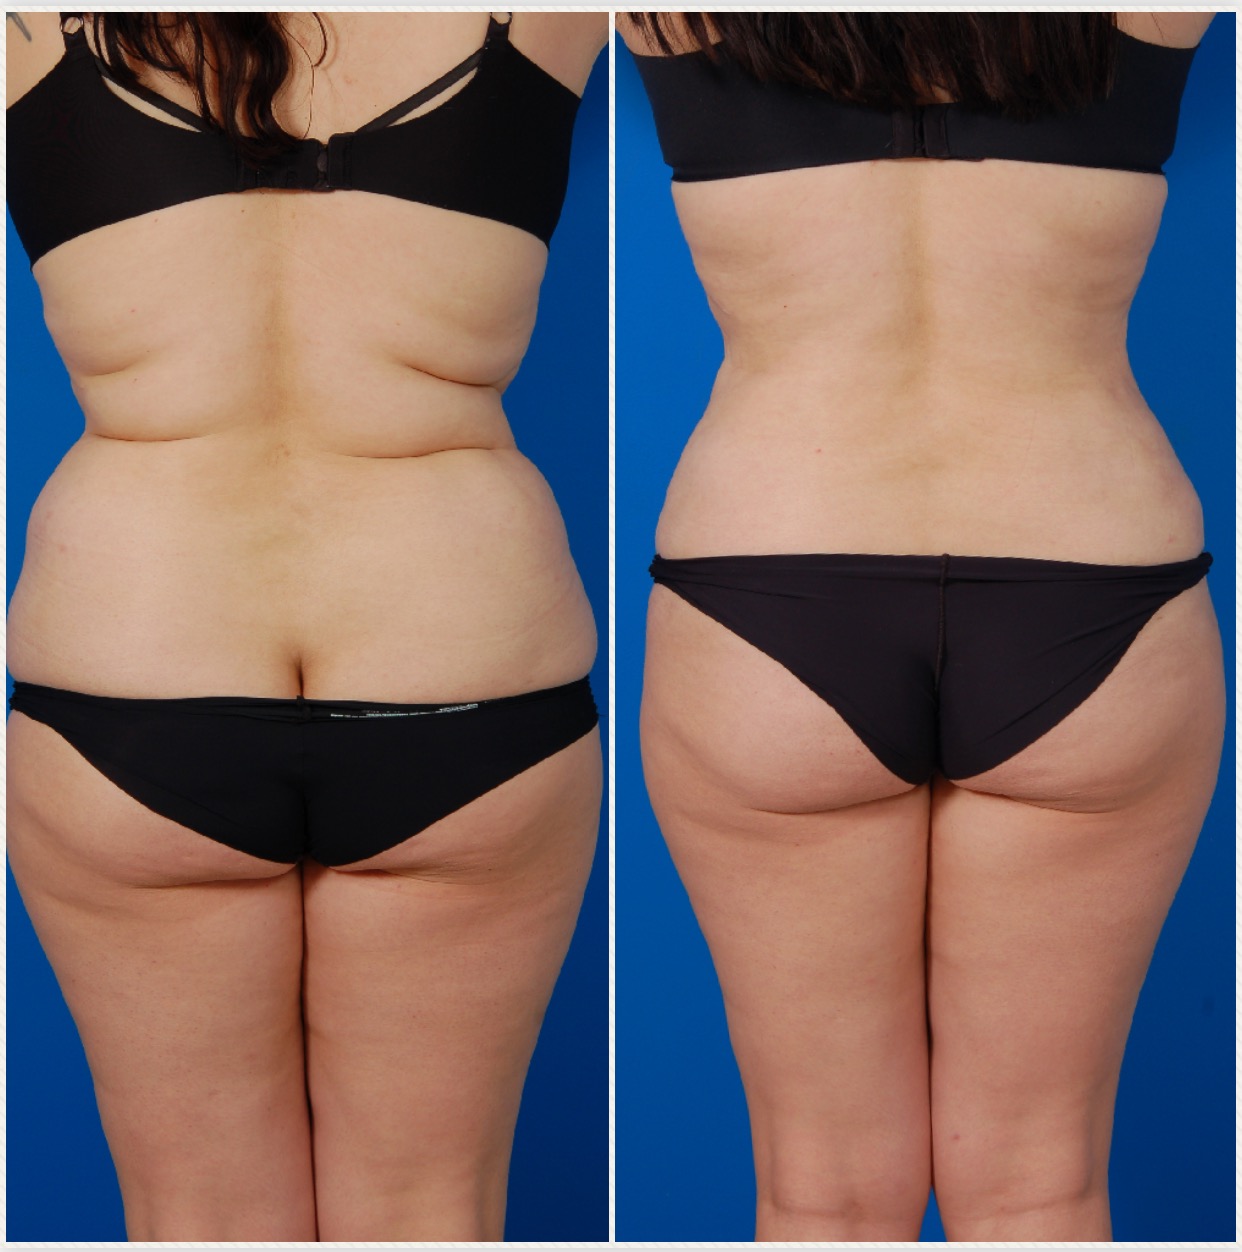 Woman's body, before and after Liposuction Revision Surgery, back view, patient 1